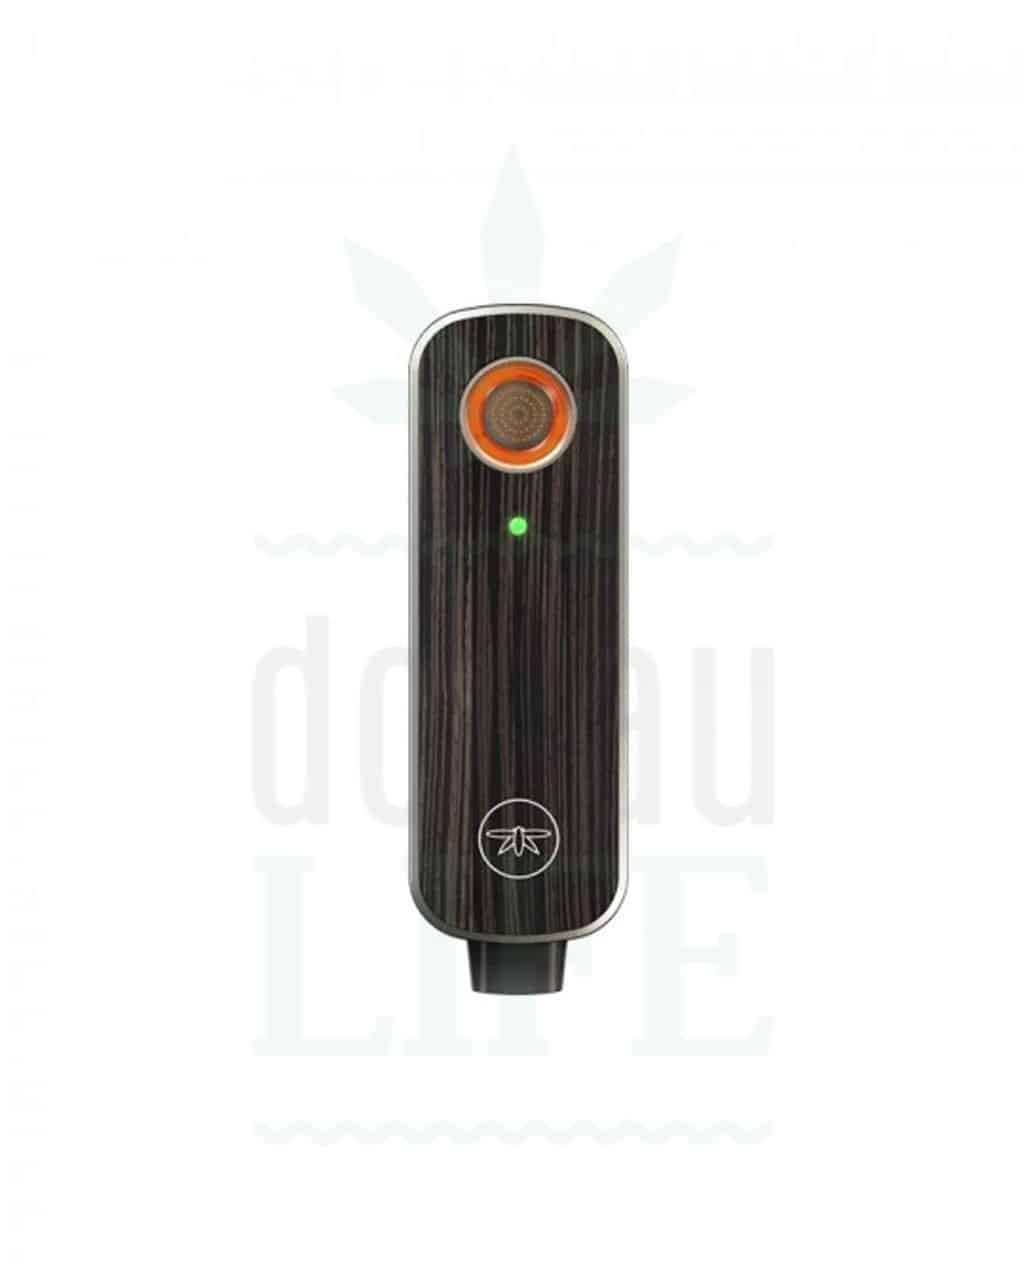 Vaporizer Firefly 2+ mobile vaporizer for herbs + extracts